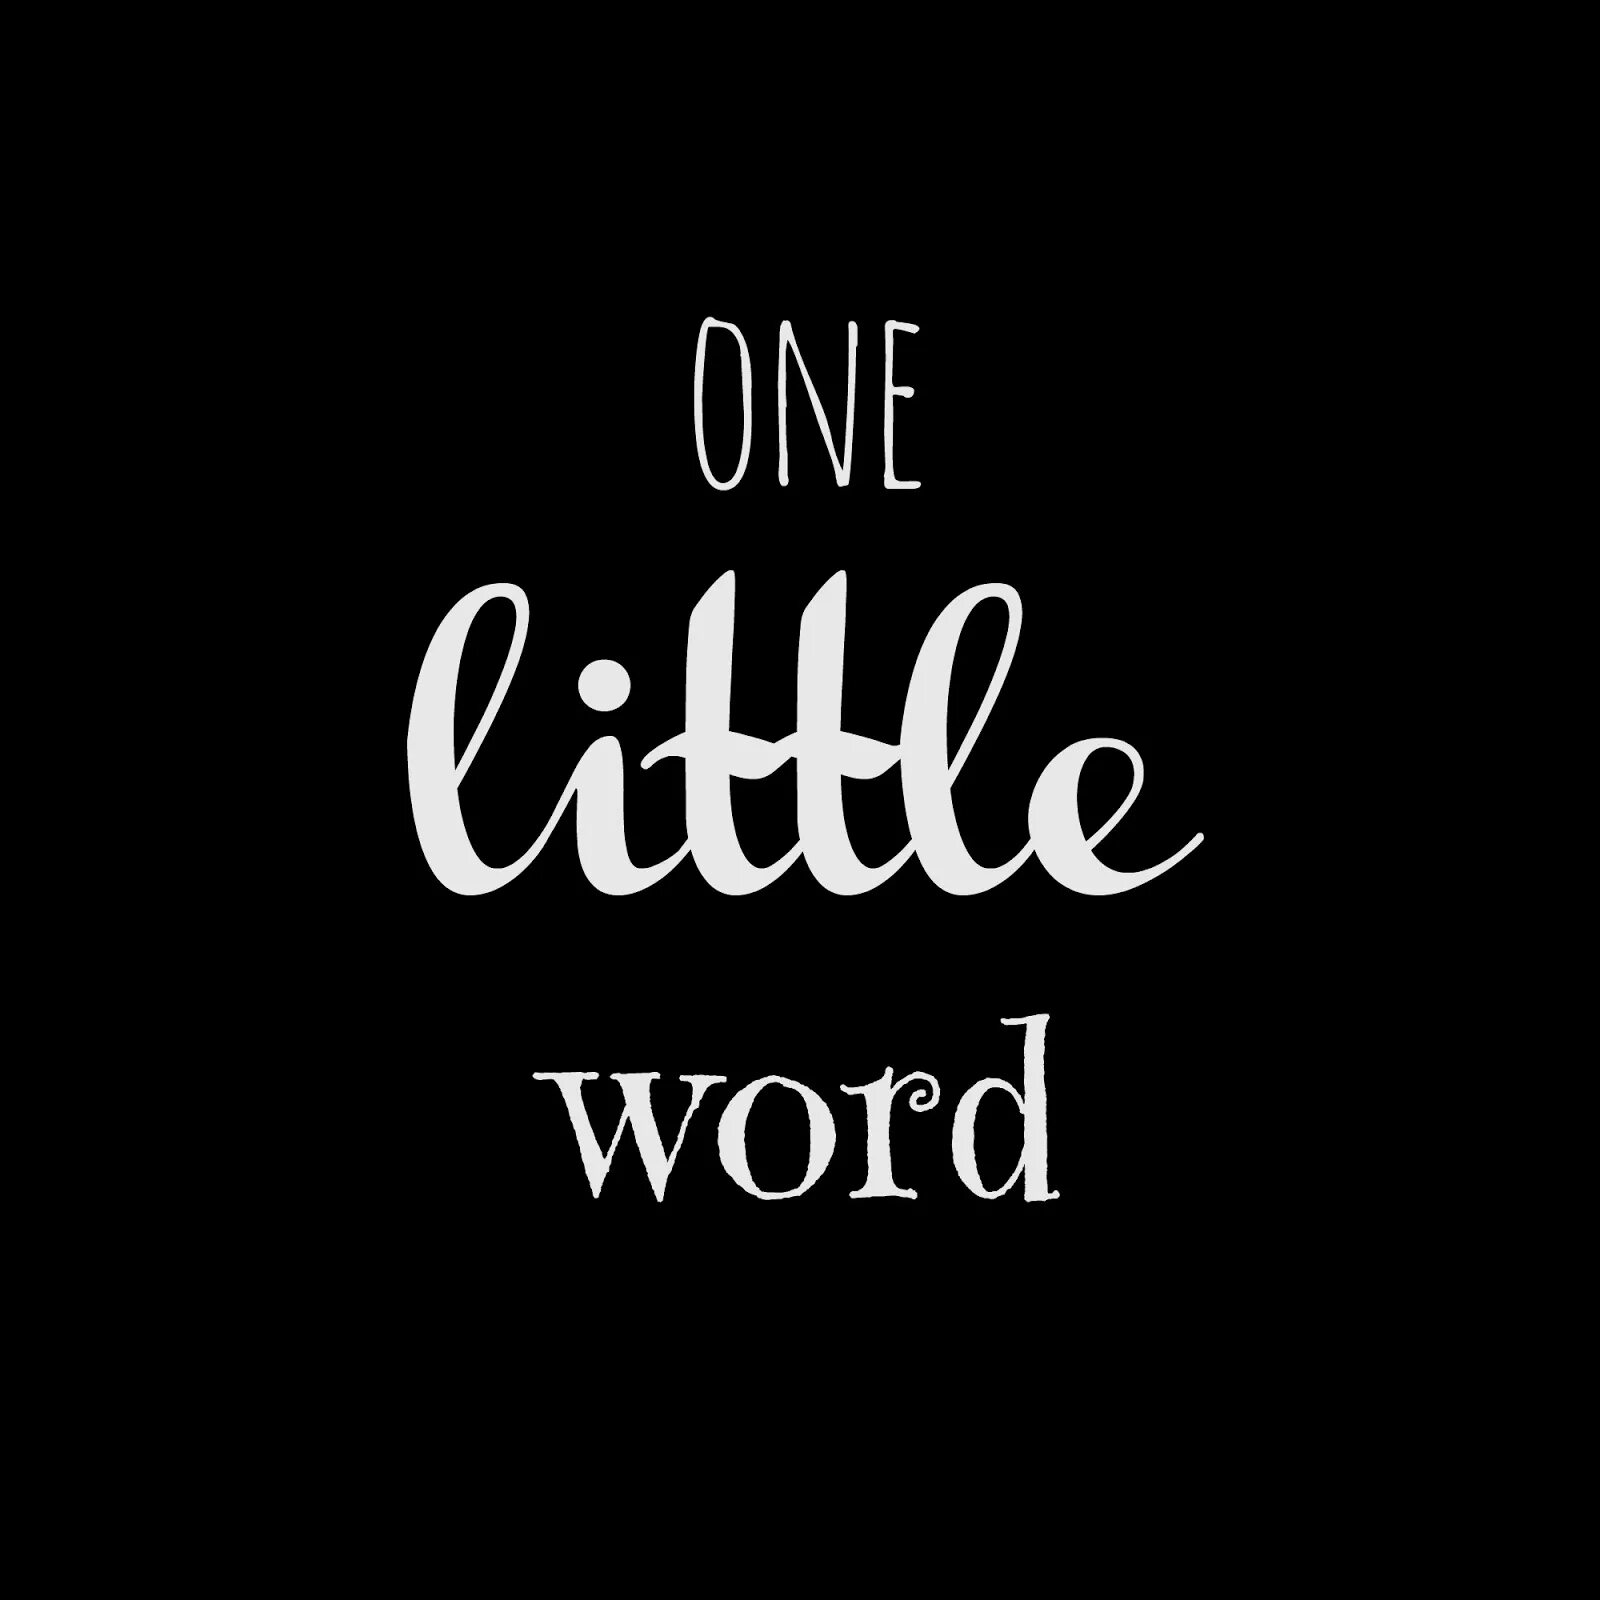 Two little words. Little слово. Картинки к слову little. What's the Word. One Word.